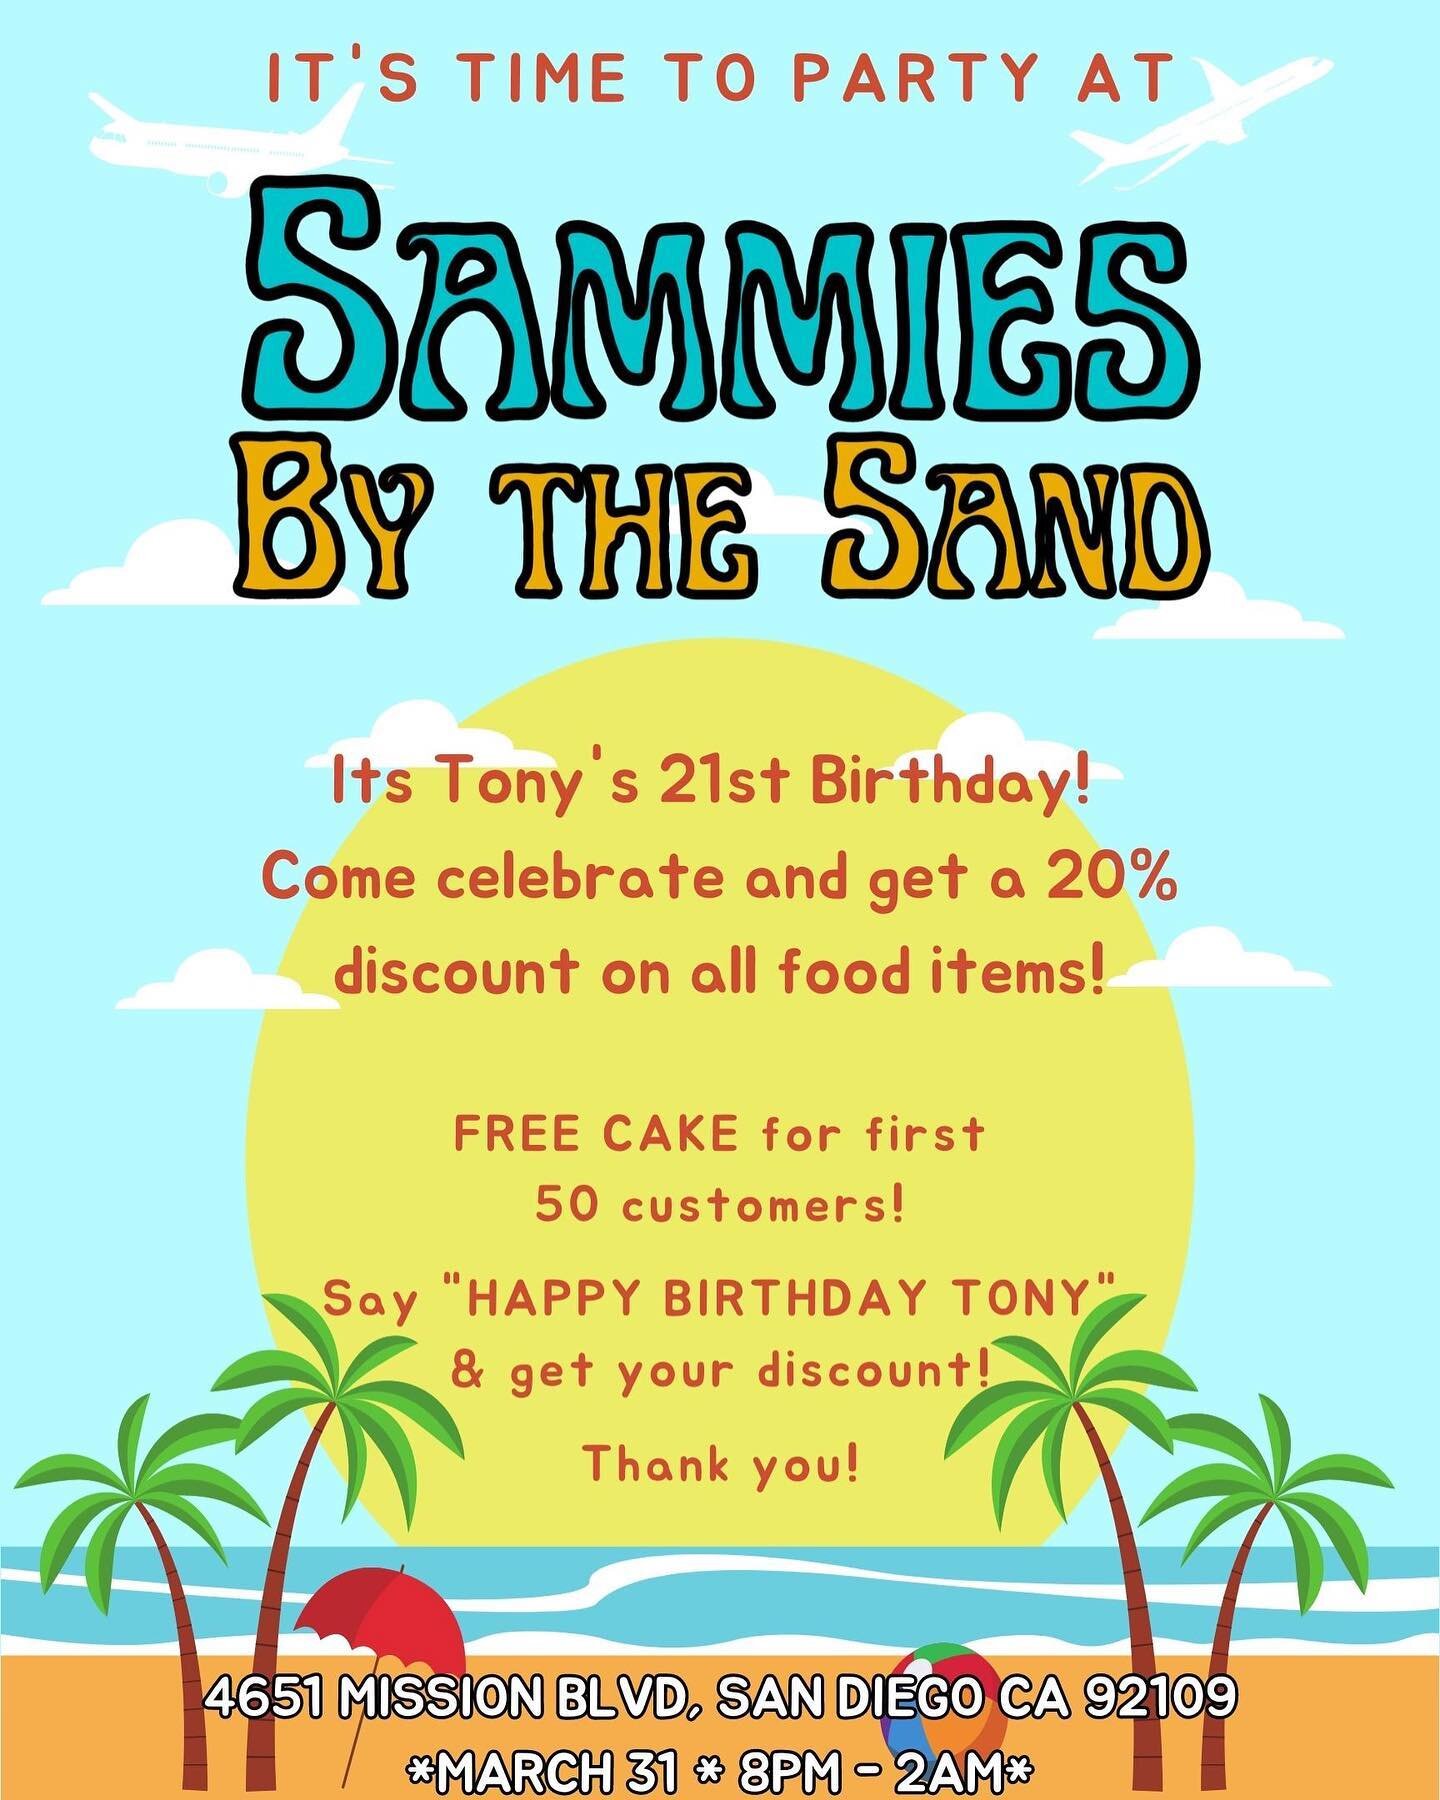 Save the date! We have an event at Sammies by the Sand that you wont want to miss! 🎉🥪 #sandiego #pacificbeachsandiego #sandwich #snacks #beachparty #deals #discounts #smallbusiness